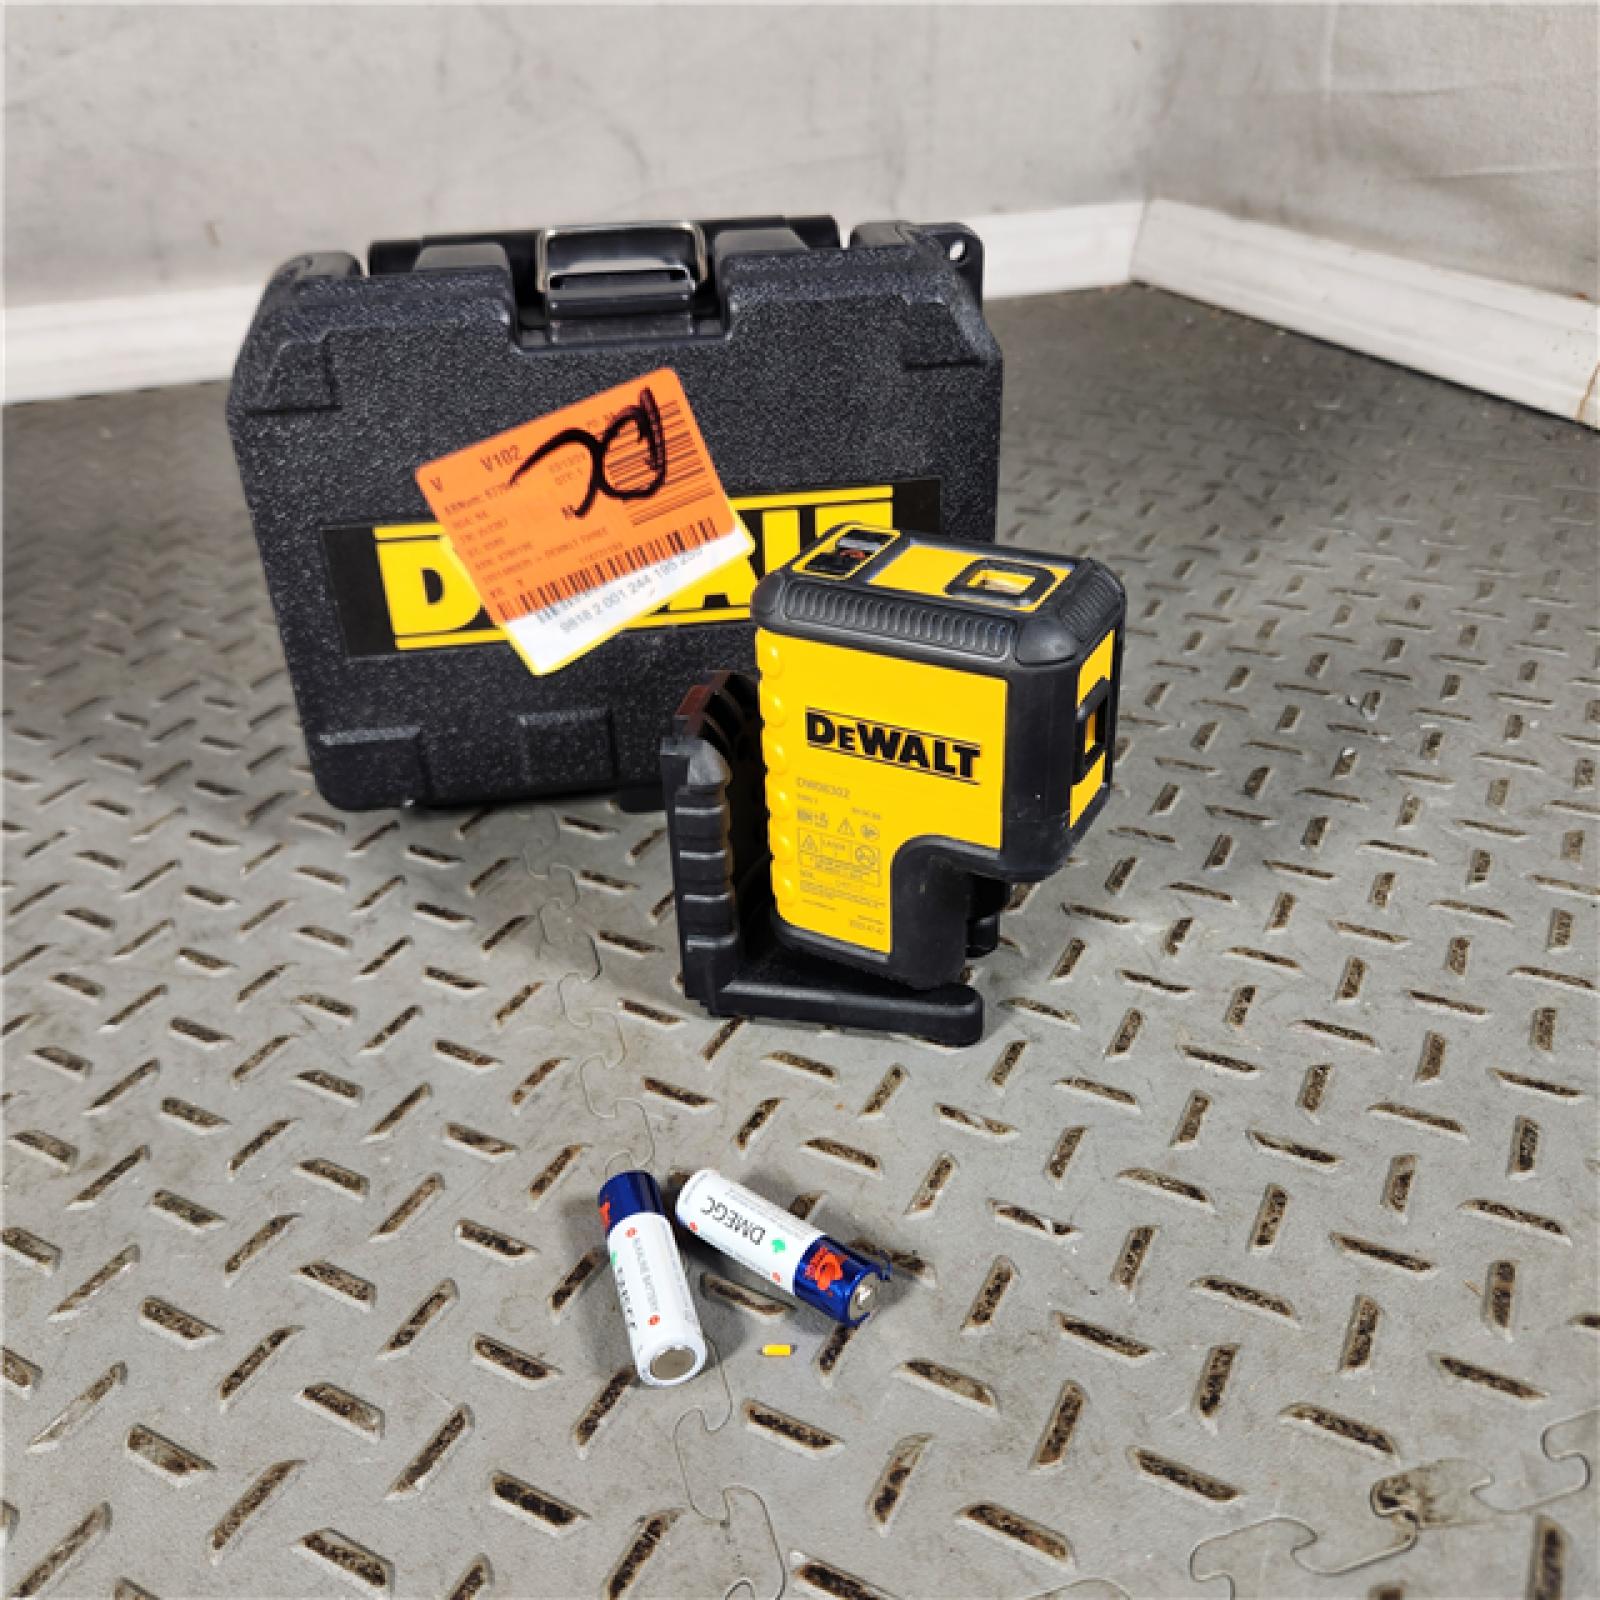 Houston Location - AS-IS DeWalt DW08302CG Green 3 Spot Laser Level - Appears IN NEW Condition